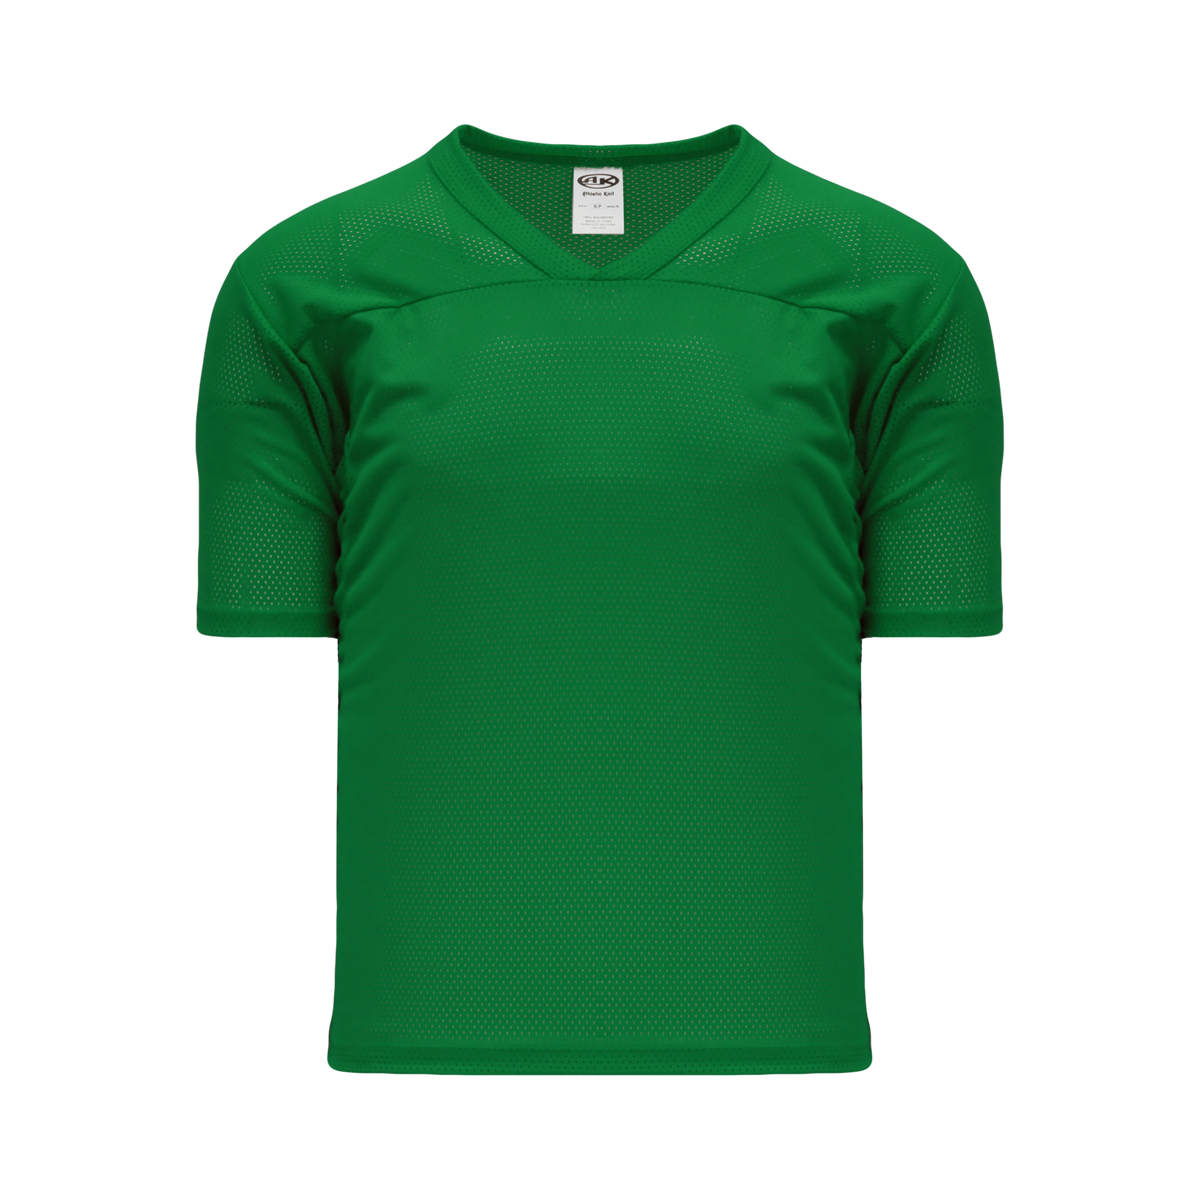 Athletic Knit (AK) TF151-007 Kelly Green Touch Football Jersey 